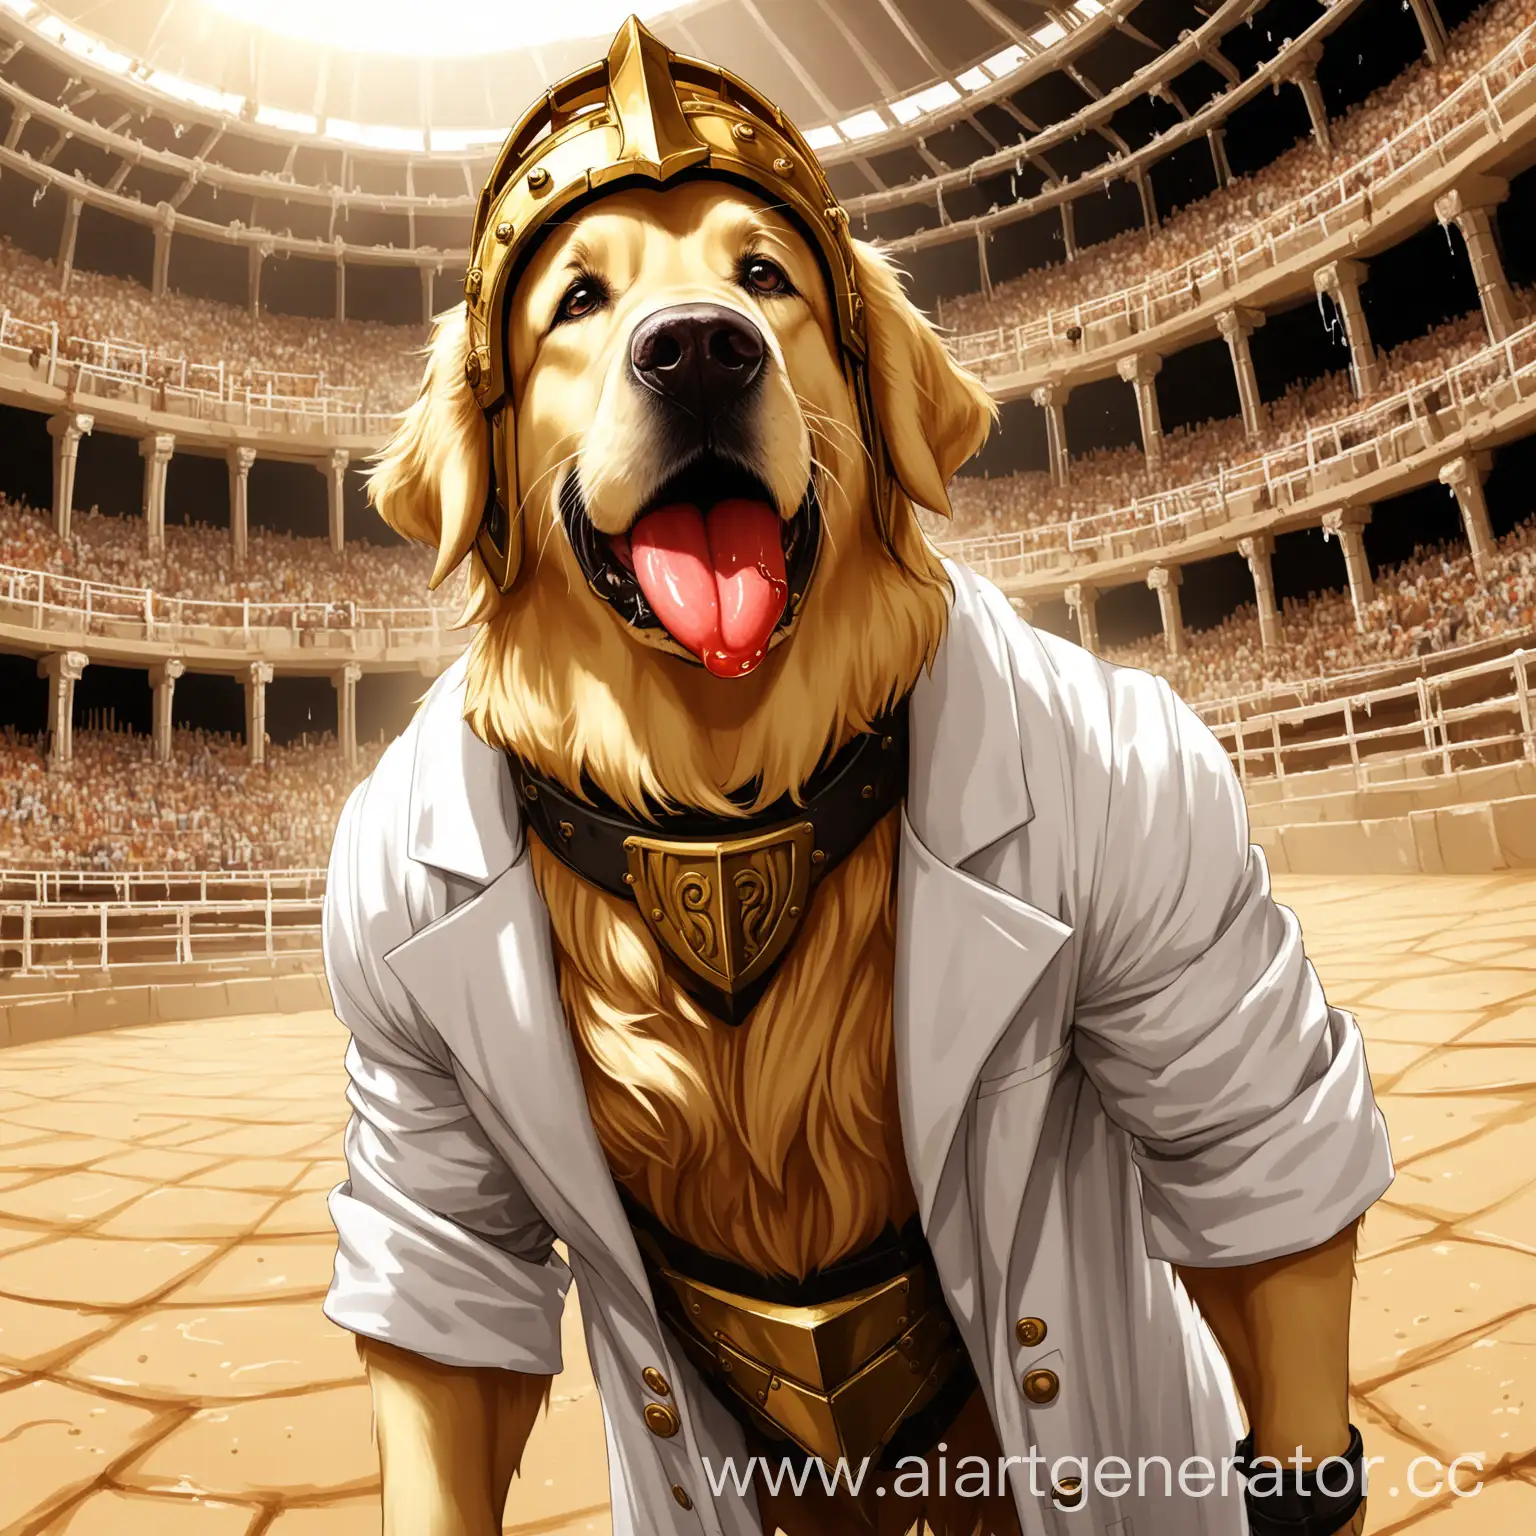  a golden retriver wearing lab coat , lab protect goggles , a gladiator helmet  , in the arena , more muscles ,  arc coloumns ,tongue hanging out and drool dripping. perspective 